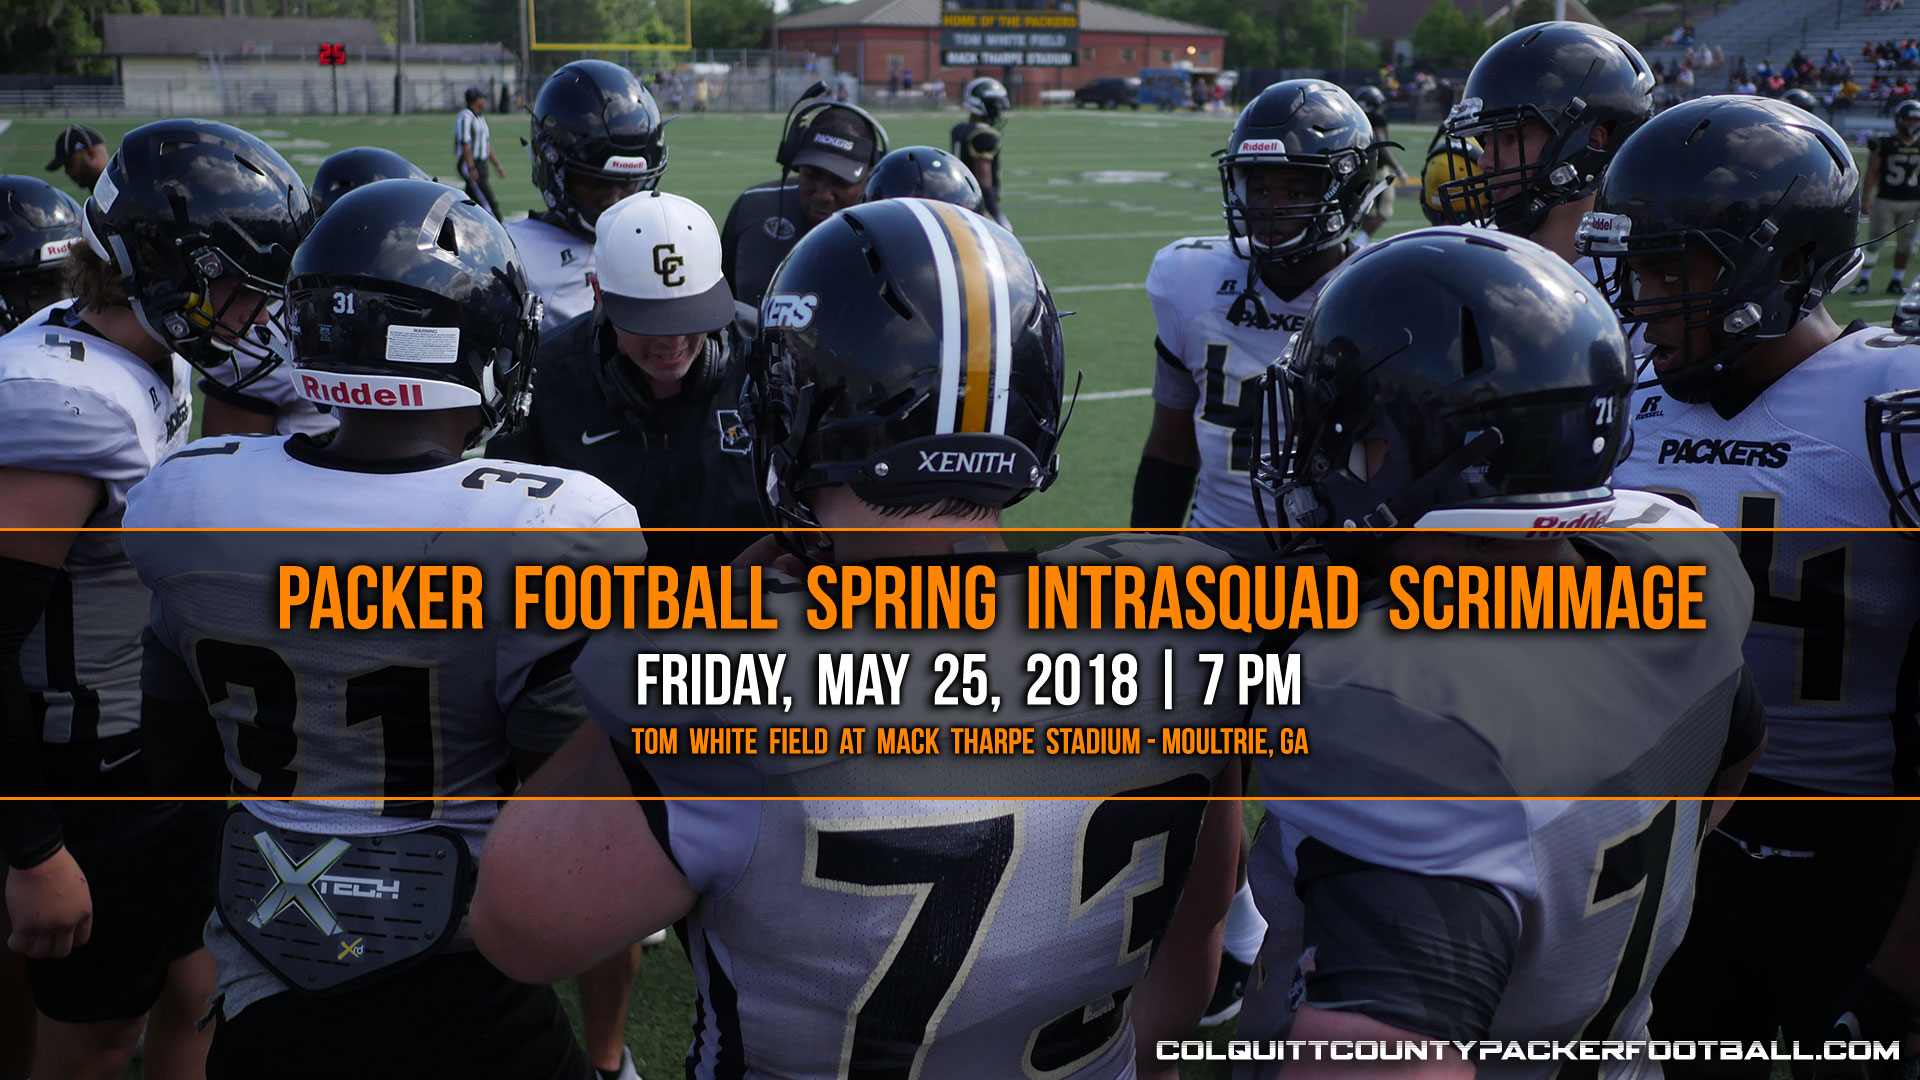 colquitt county packer football spring intrasquad scrimmage friday may 25 2018 moultrie ga